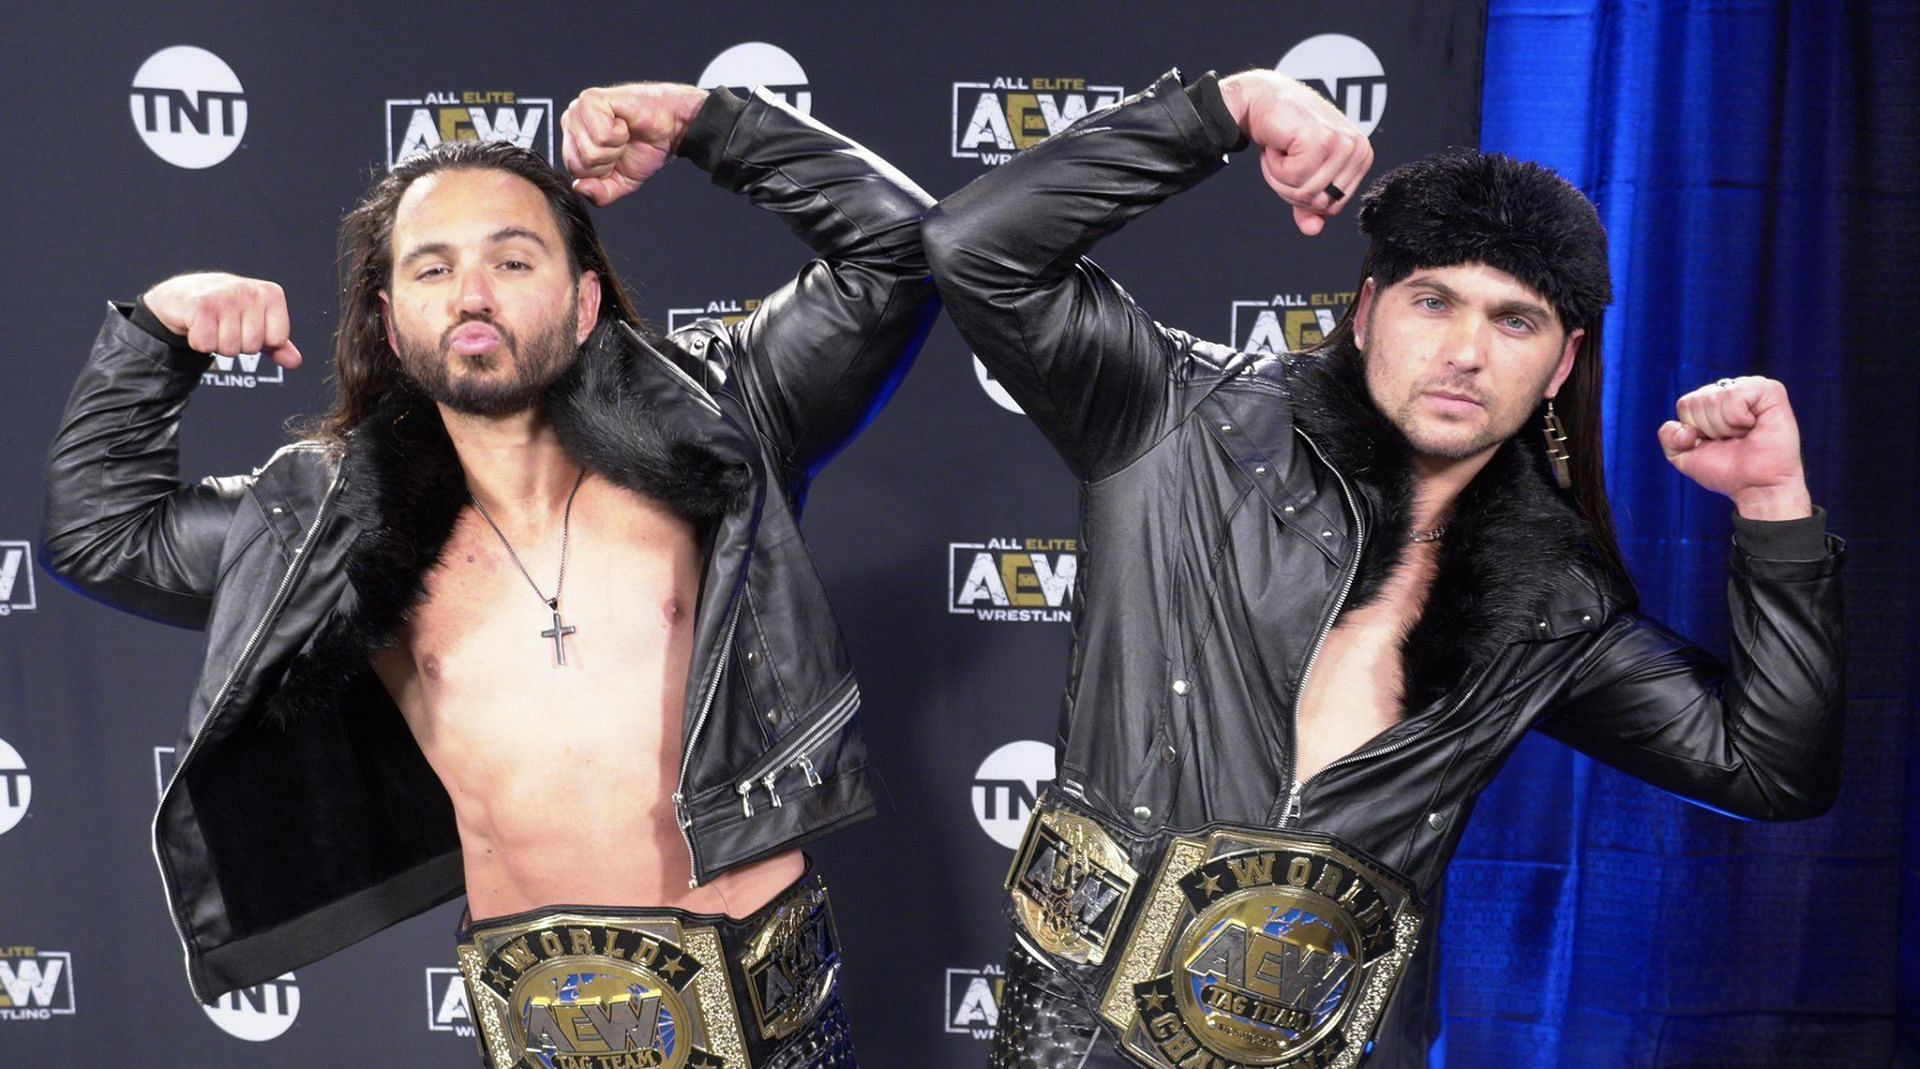 5 dream matches for The Young Bucks in WWE